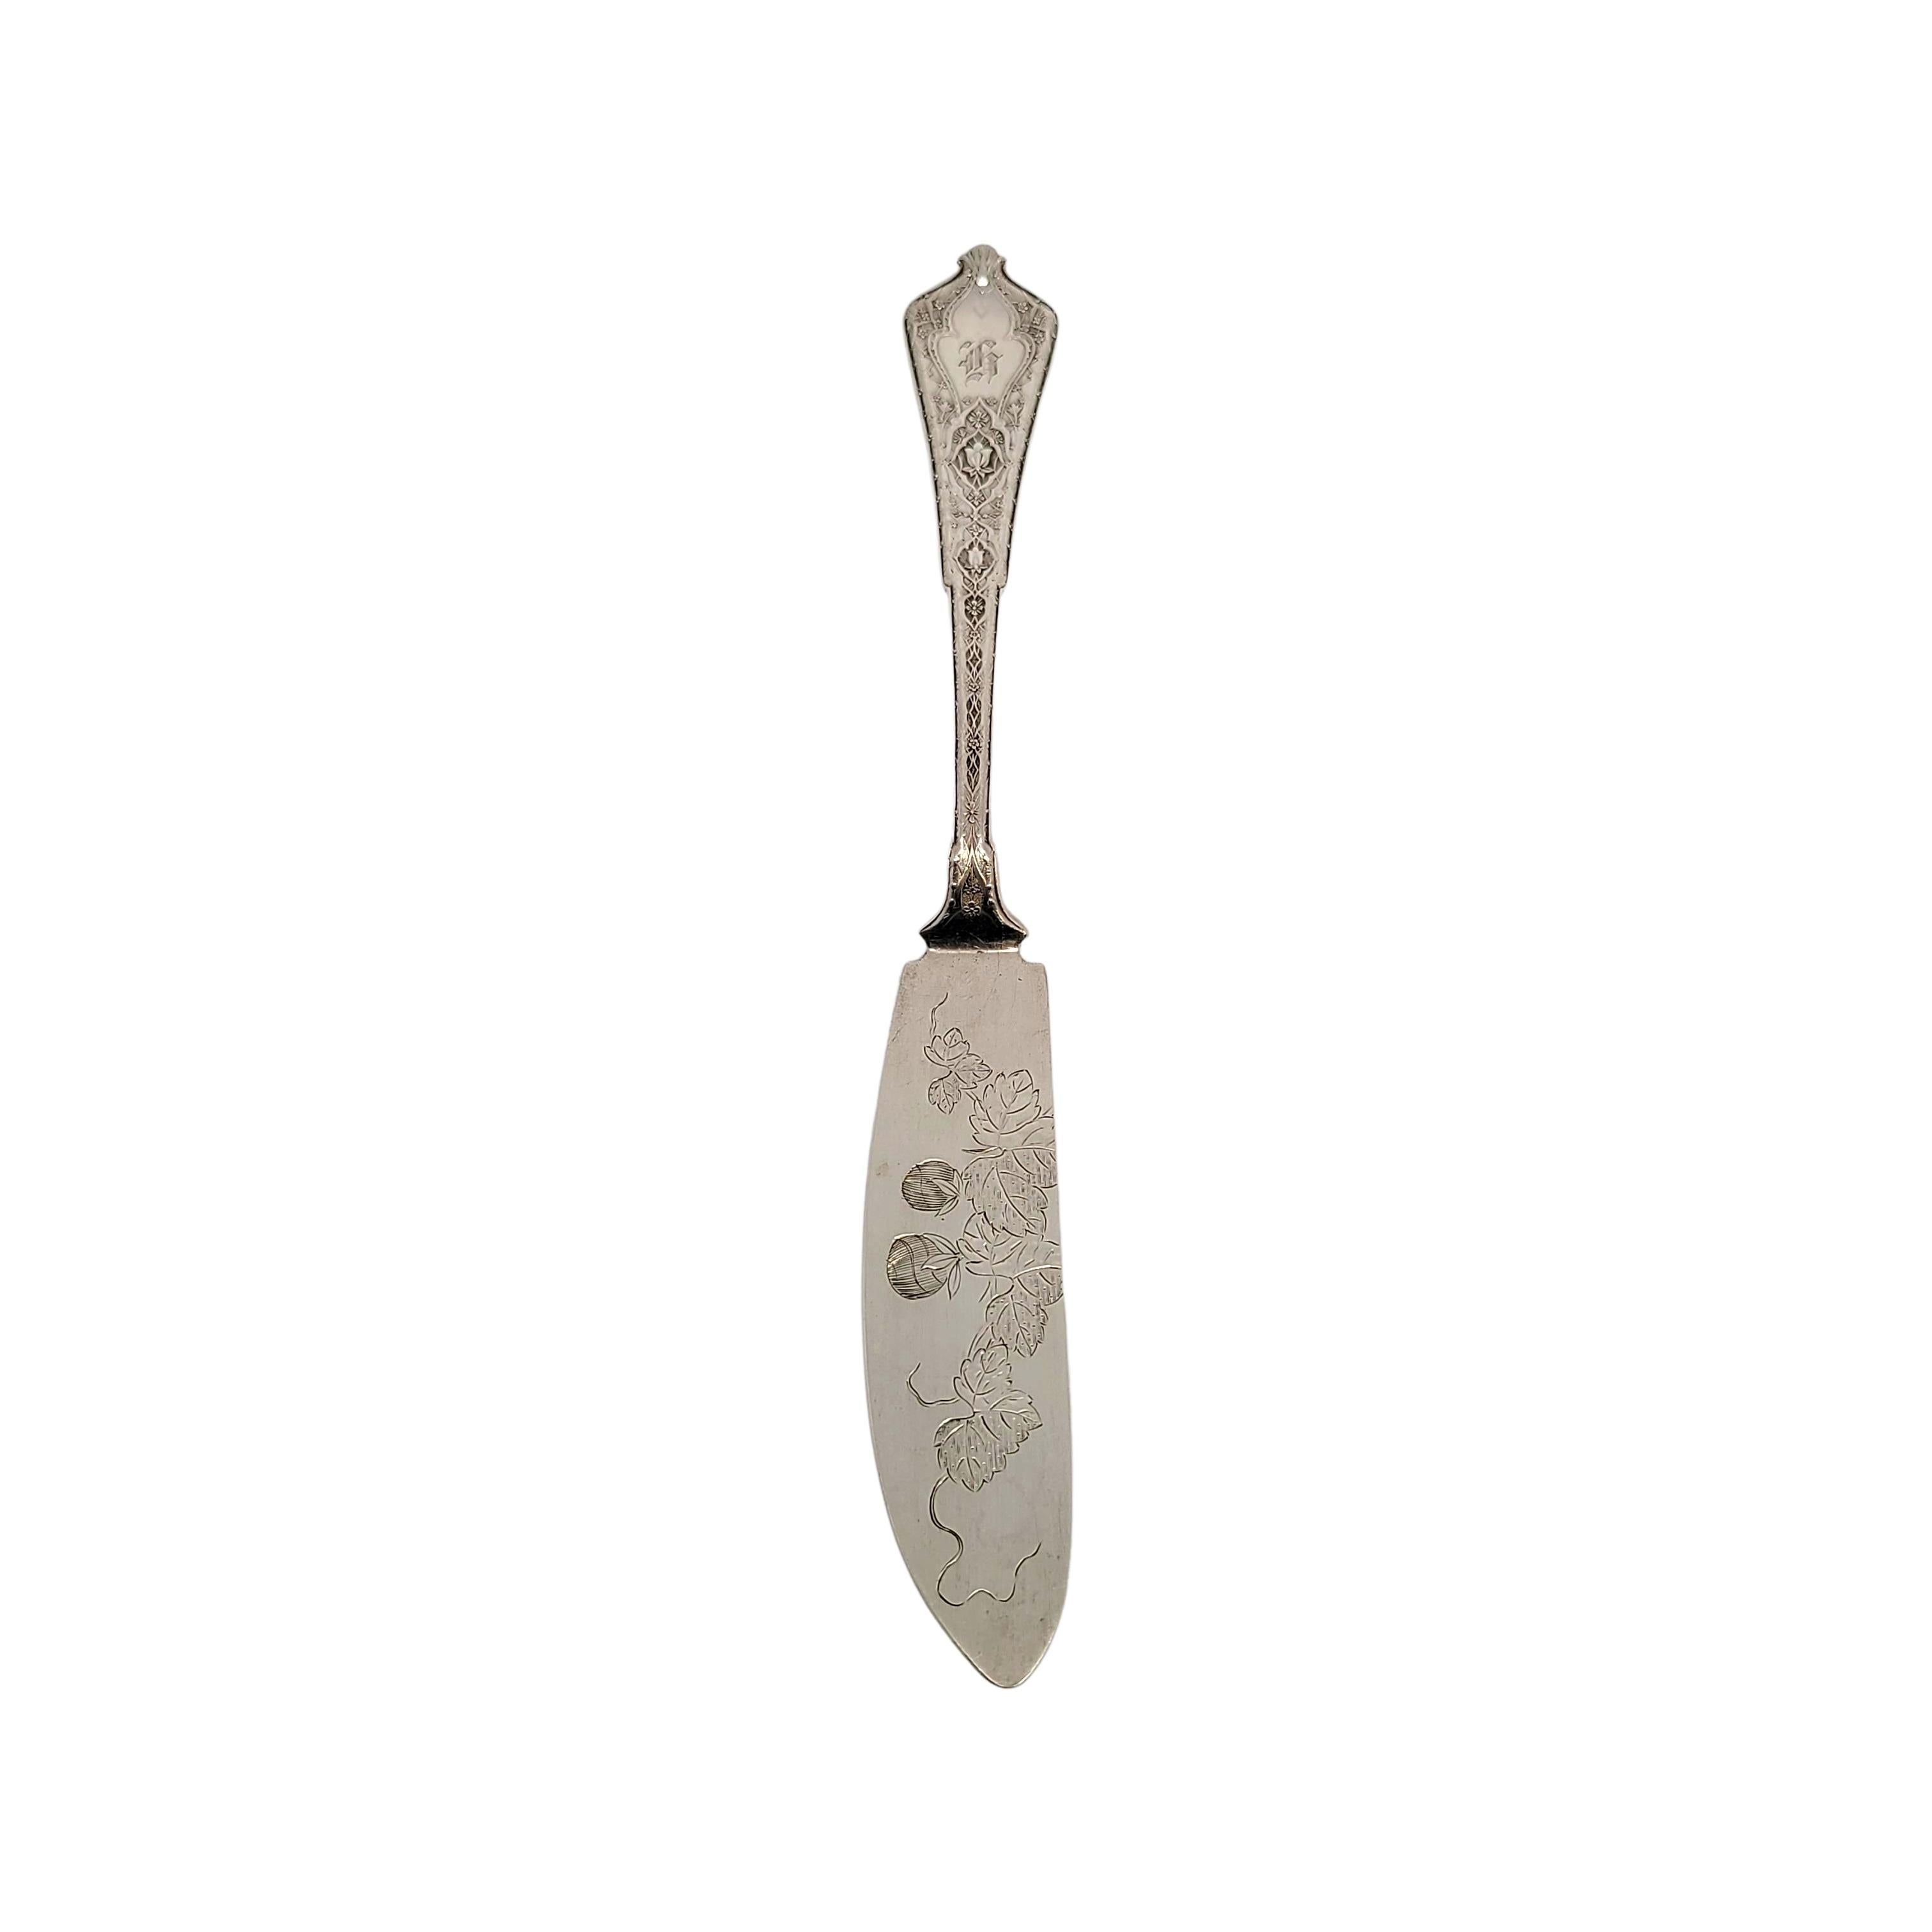 Antique Tiffany & Co sterling silver bright cut master butter knife in the Persian pattern.

Persian is an ornate pattern designed by Edward Moore. This piece features a bright cut flower and leaf design on the blade. Hallmarks date this piece to